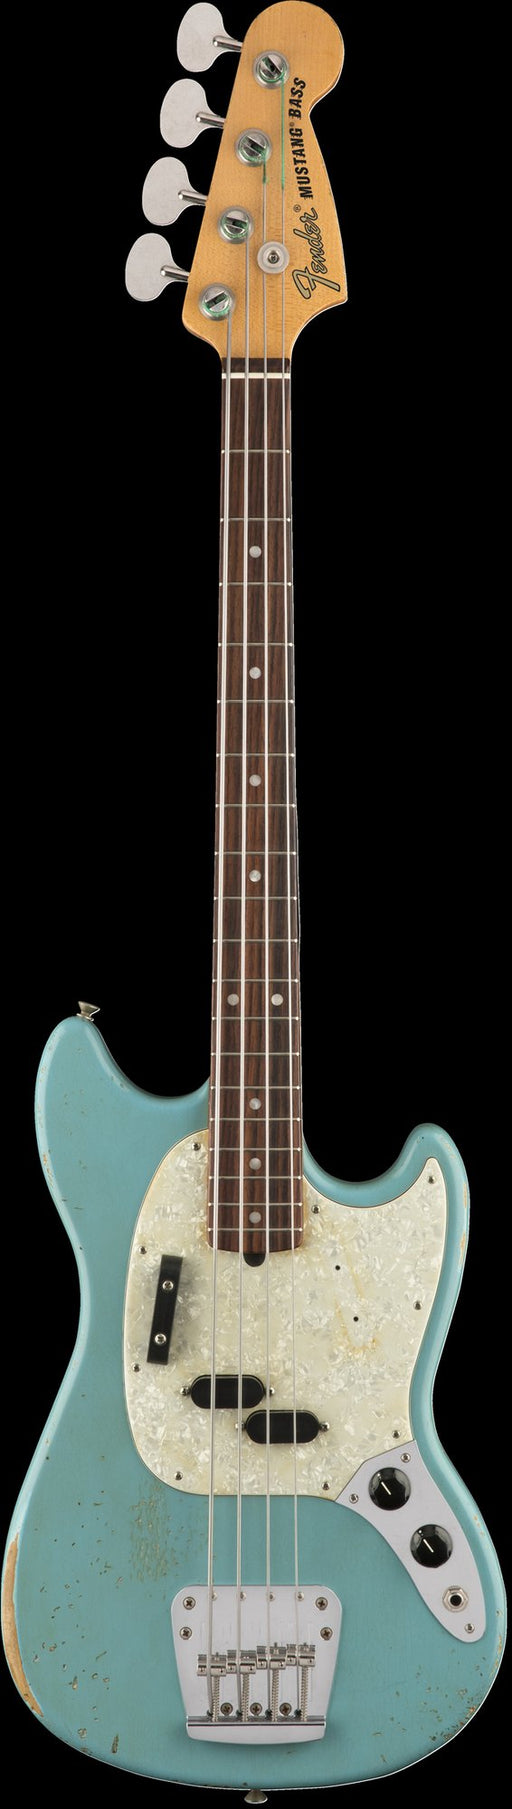 Fender Justin Meldal-Johnsen Road Worn Mustang Bass - Faded Daphne Blue with Bag